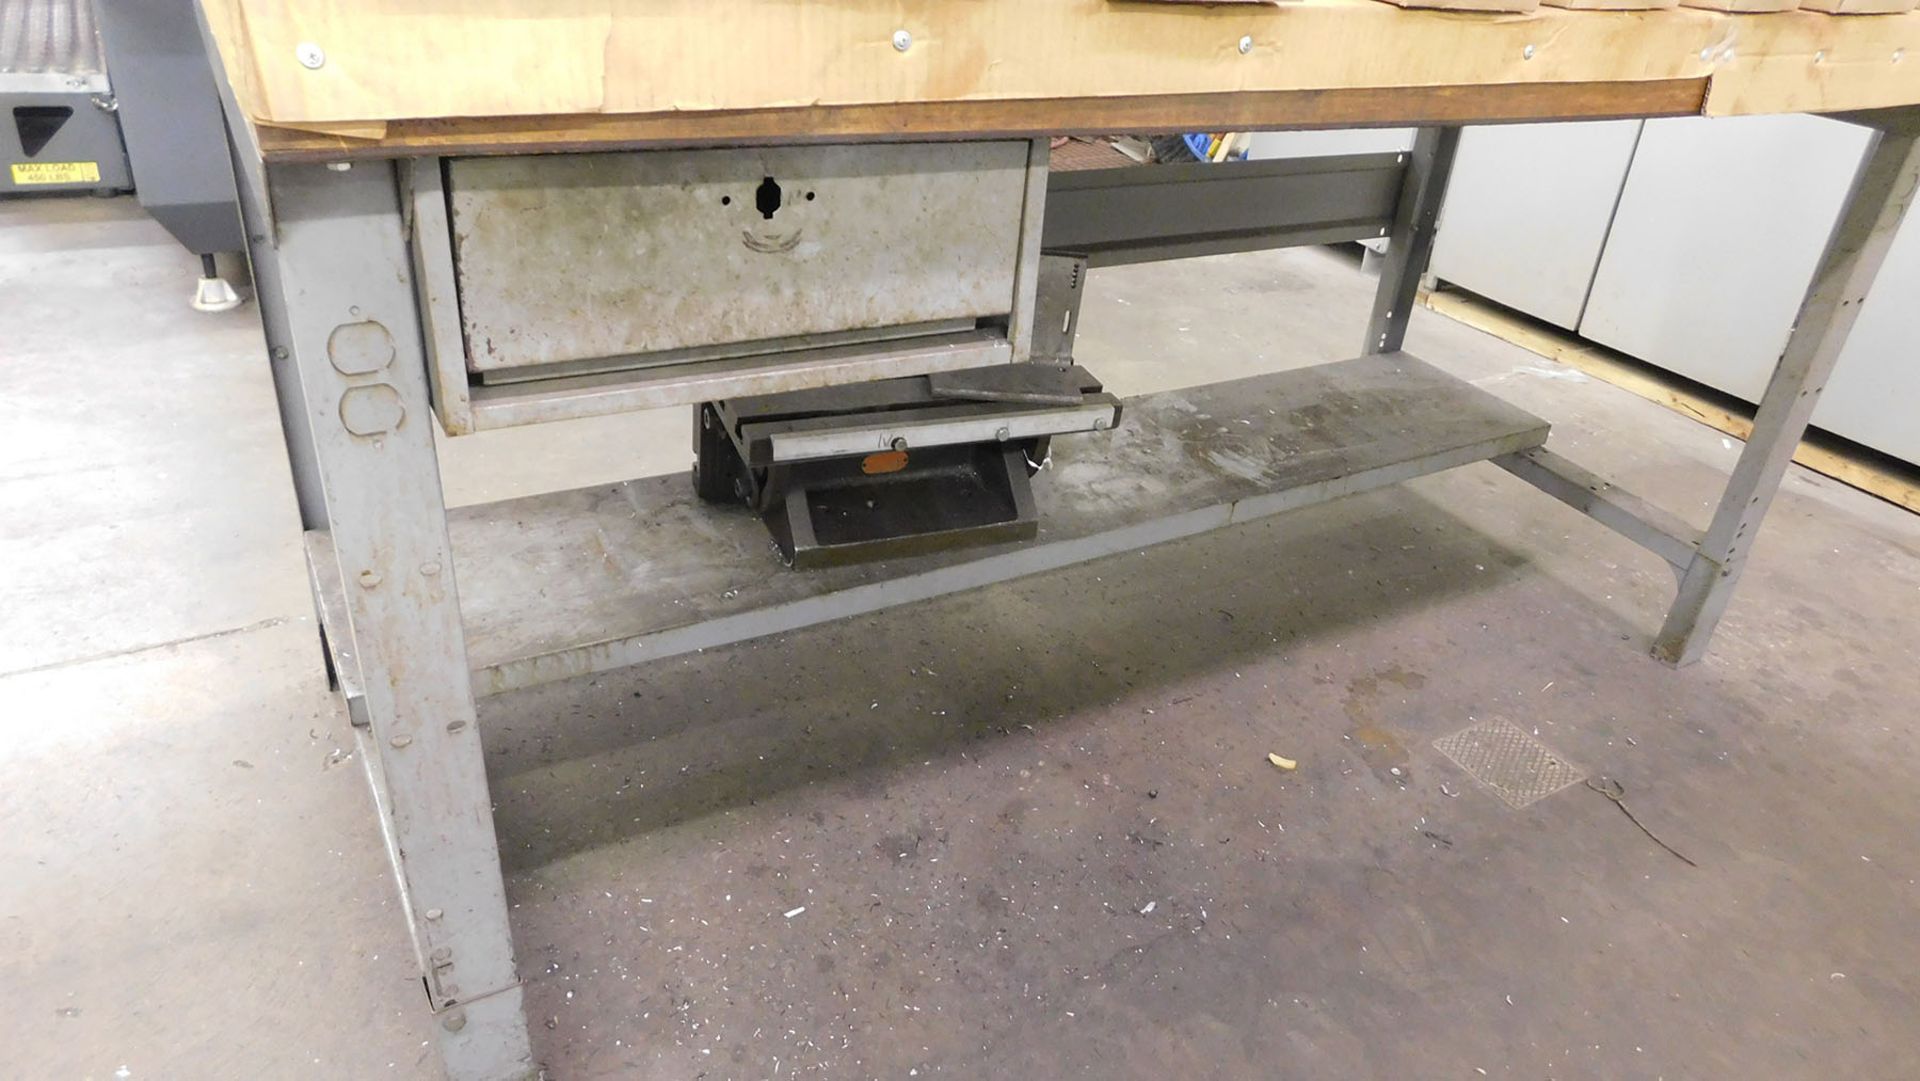 6' X 3' STEEL WORK TABLE WITH COLUMBIAN A 3 1/2 VISE